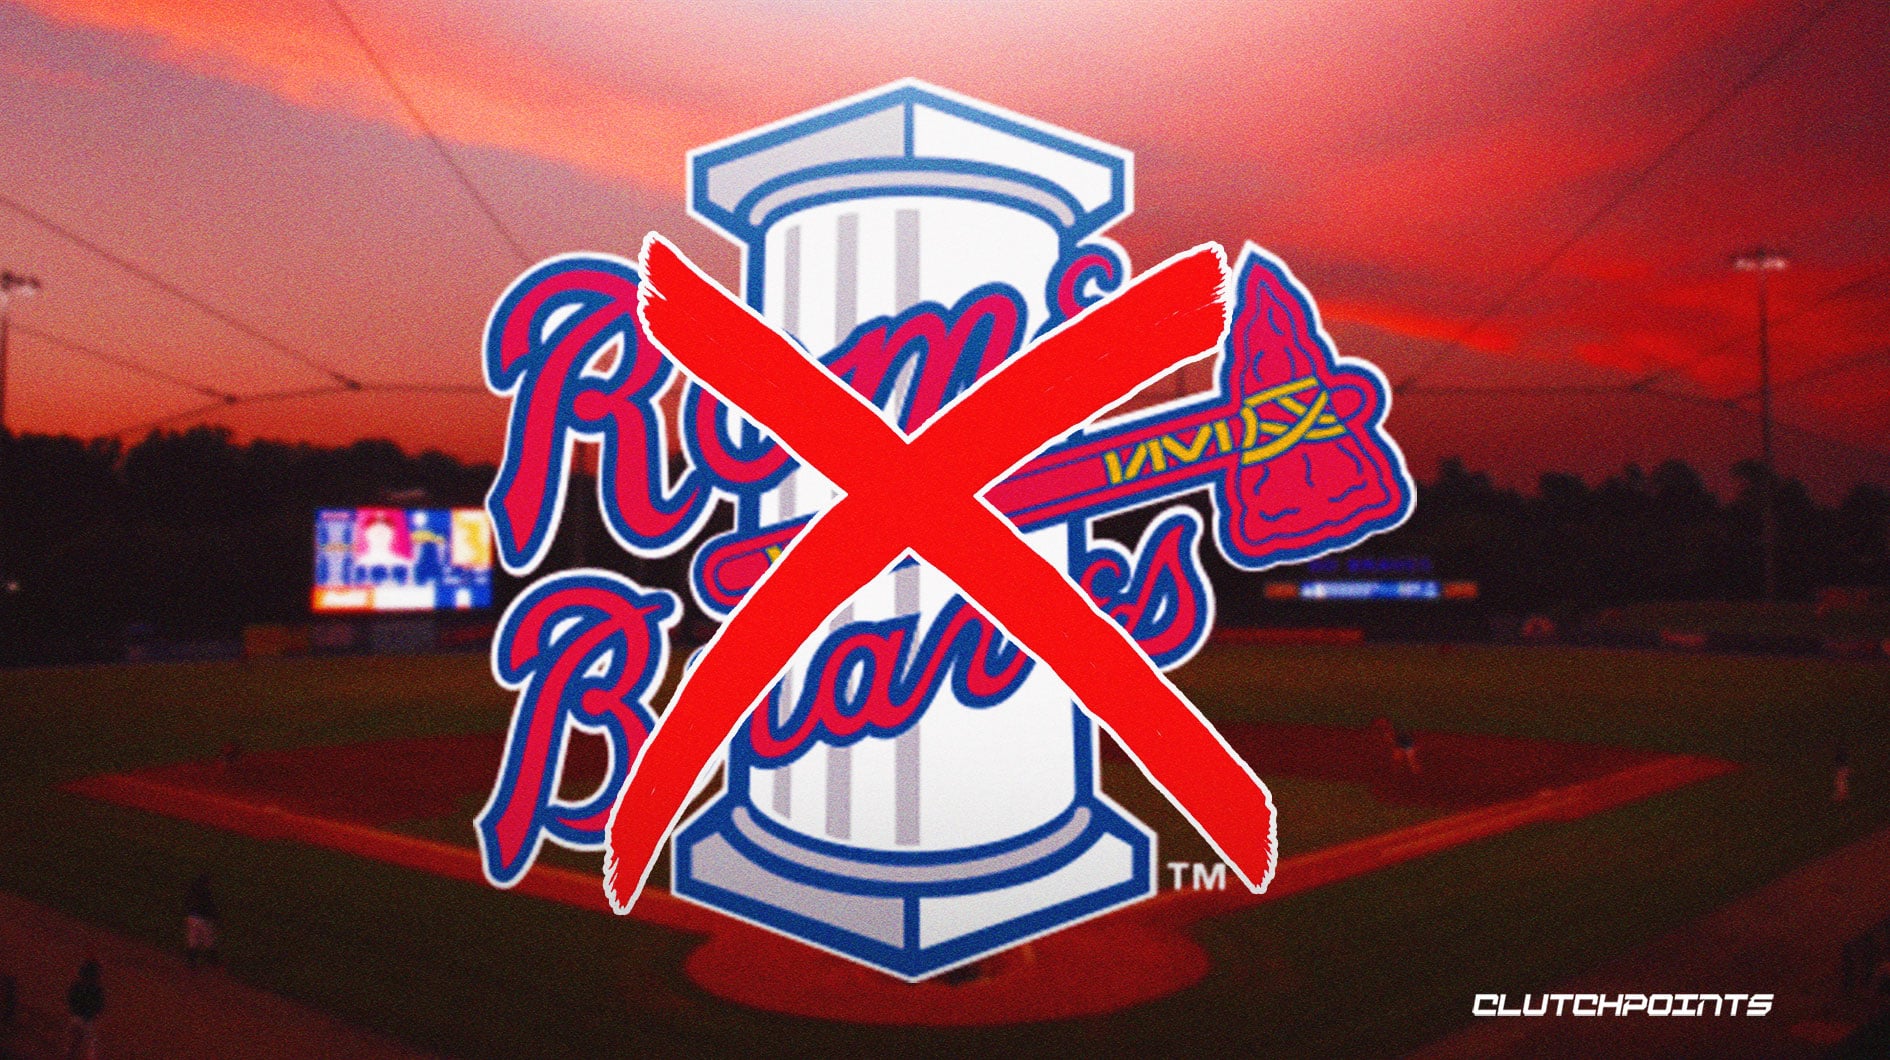 Congrats to the nine M-Braves representing the @Braves in the